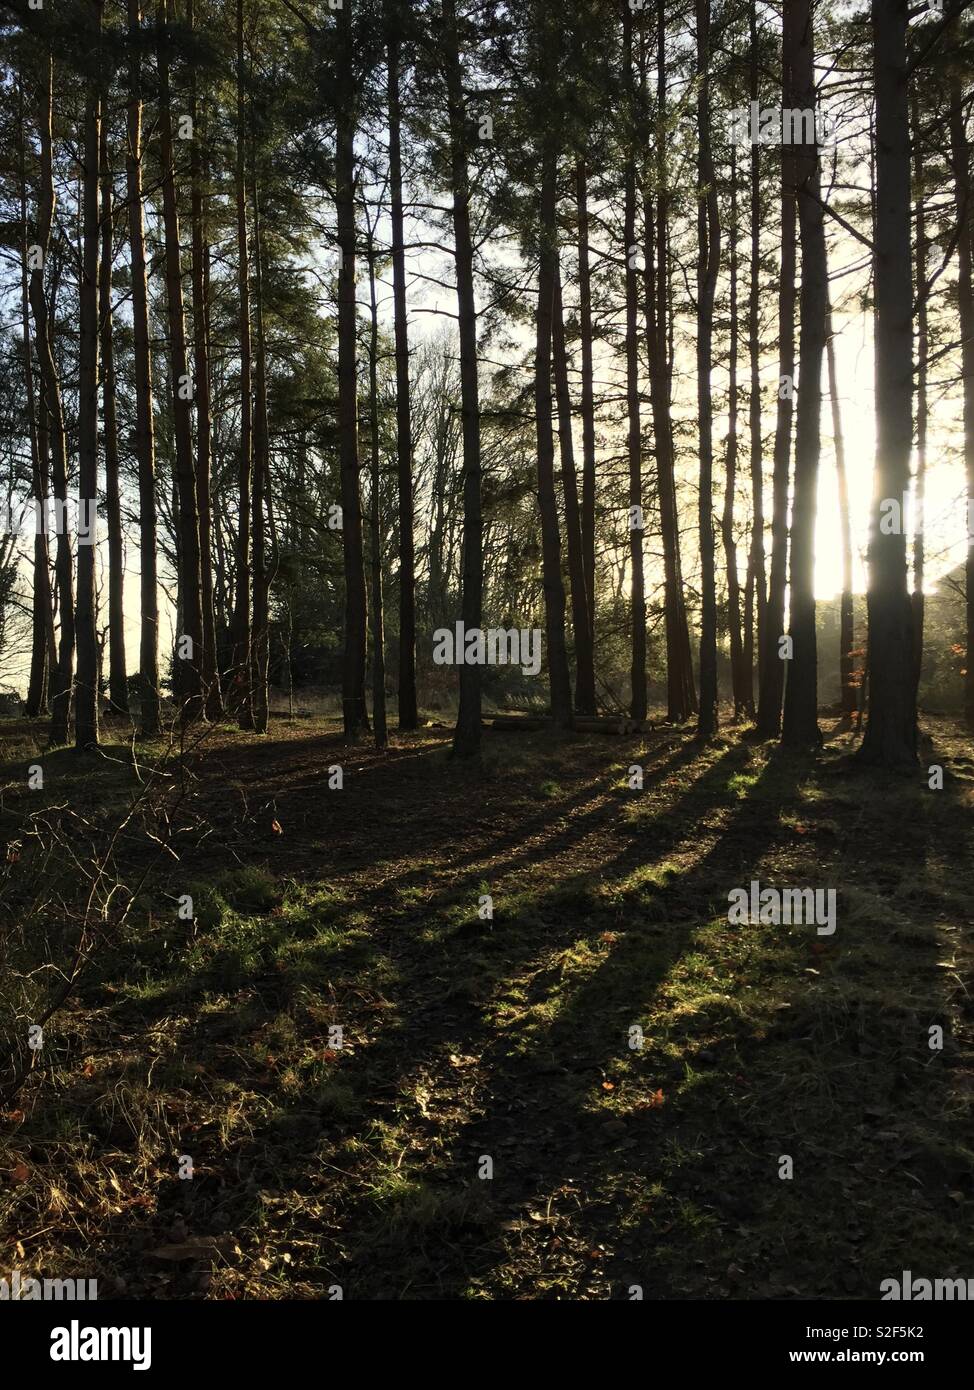 Evening sunlight filtering through a wood, giving the trees long shadows Stock Photo